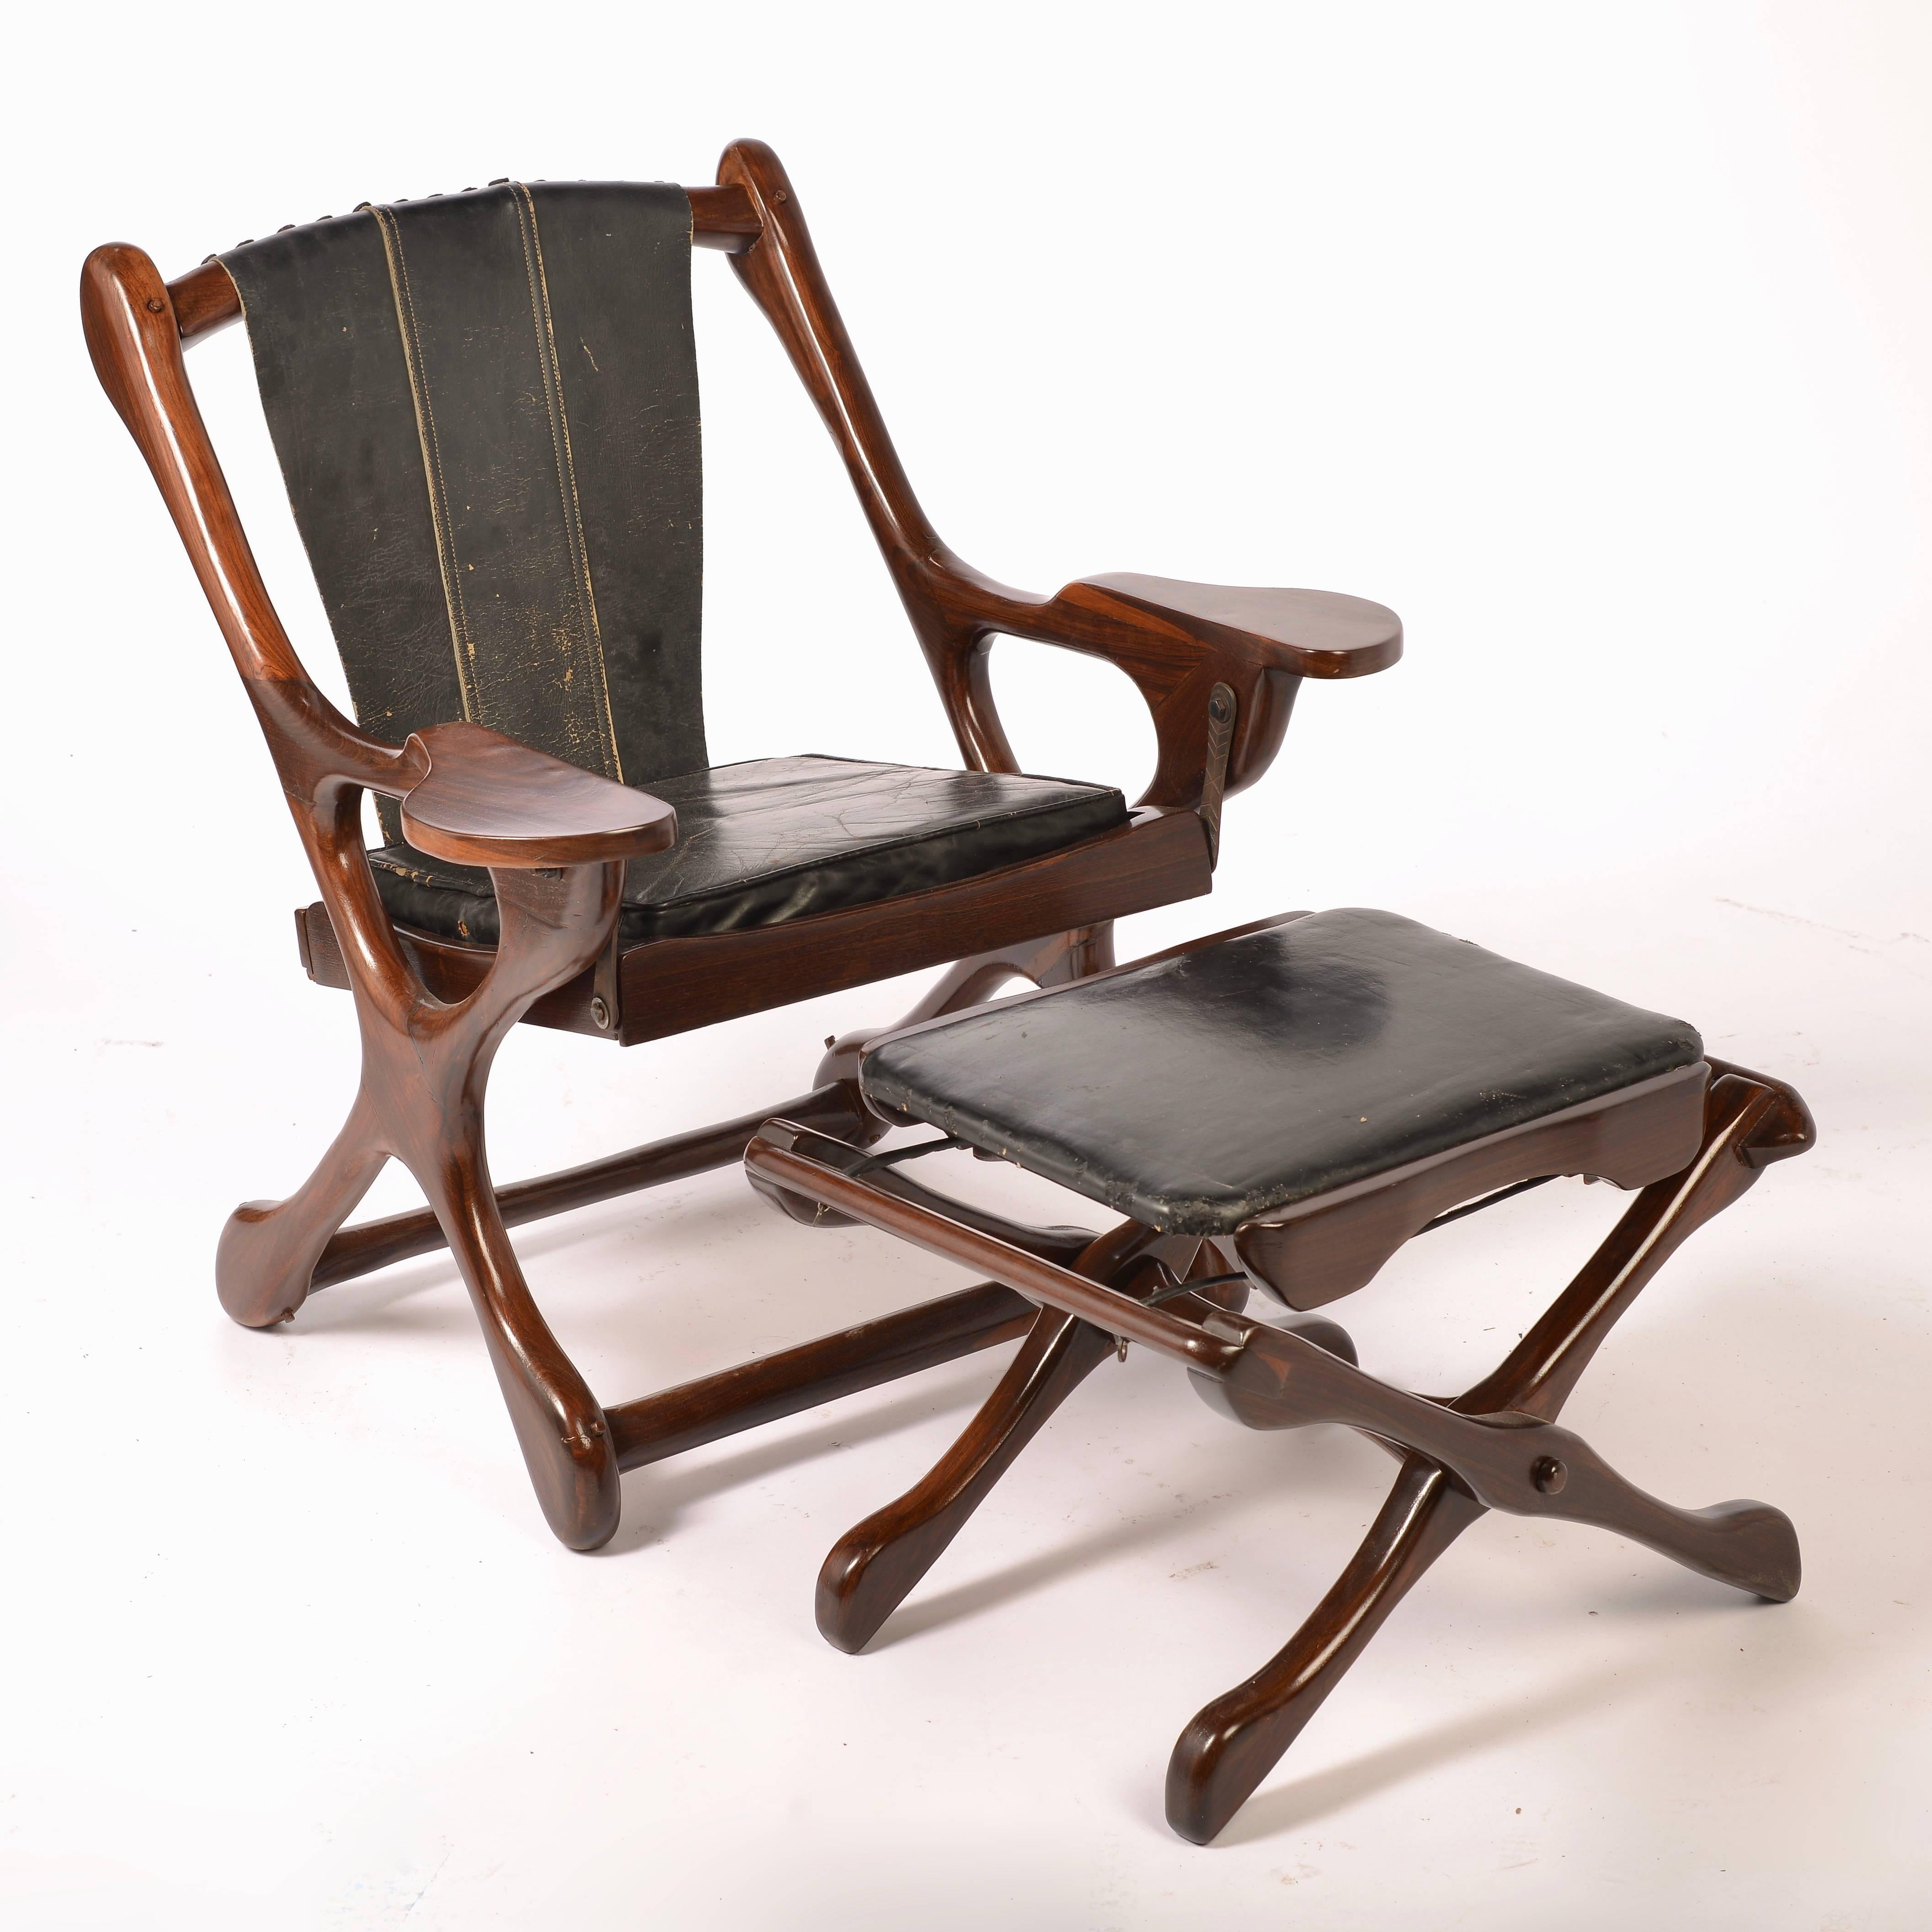 One set of Swinger chair and ottoman from Don Shoemaker for the iconic Señal, S.A workshop of Mexico. This chair has been refinished and are in excellent condition. The chairs retain the original black leather. Ottoman in leather retains the